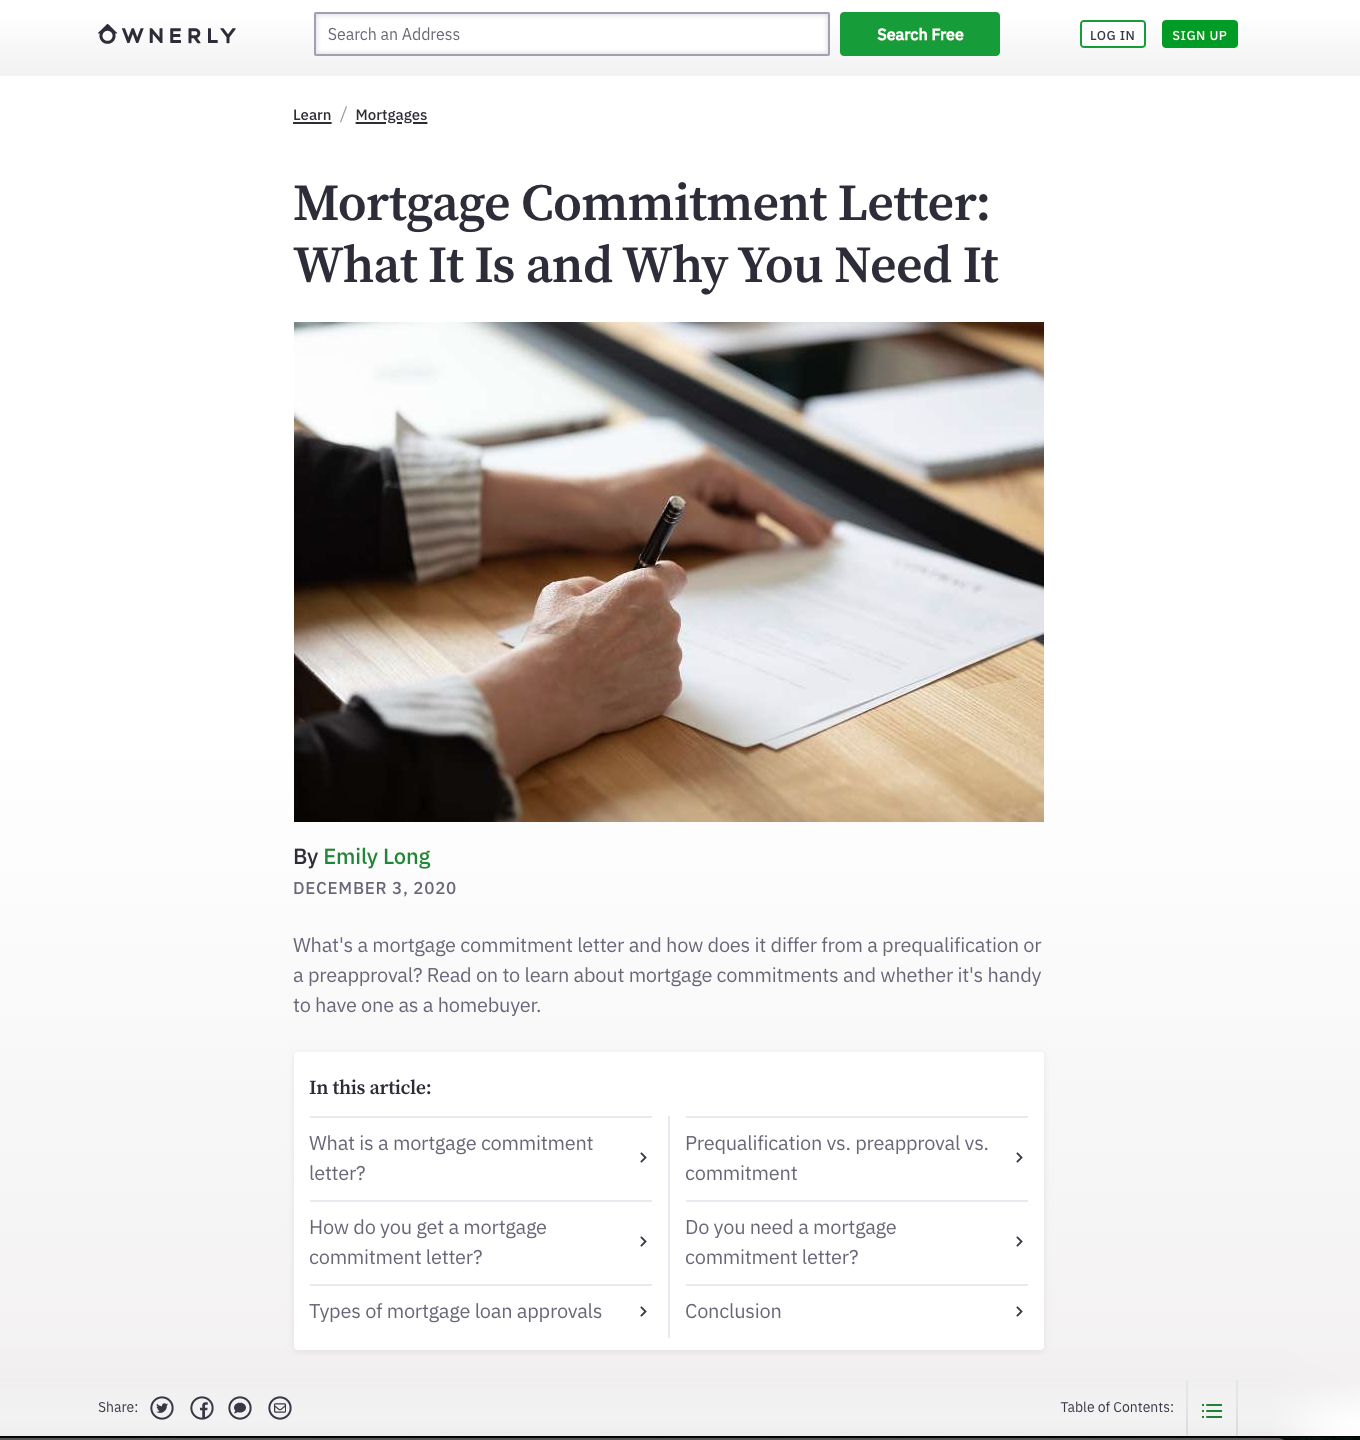 Ownerly: Mortgage Commitment Letter